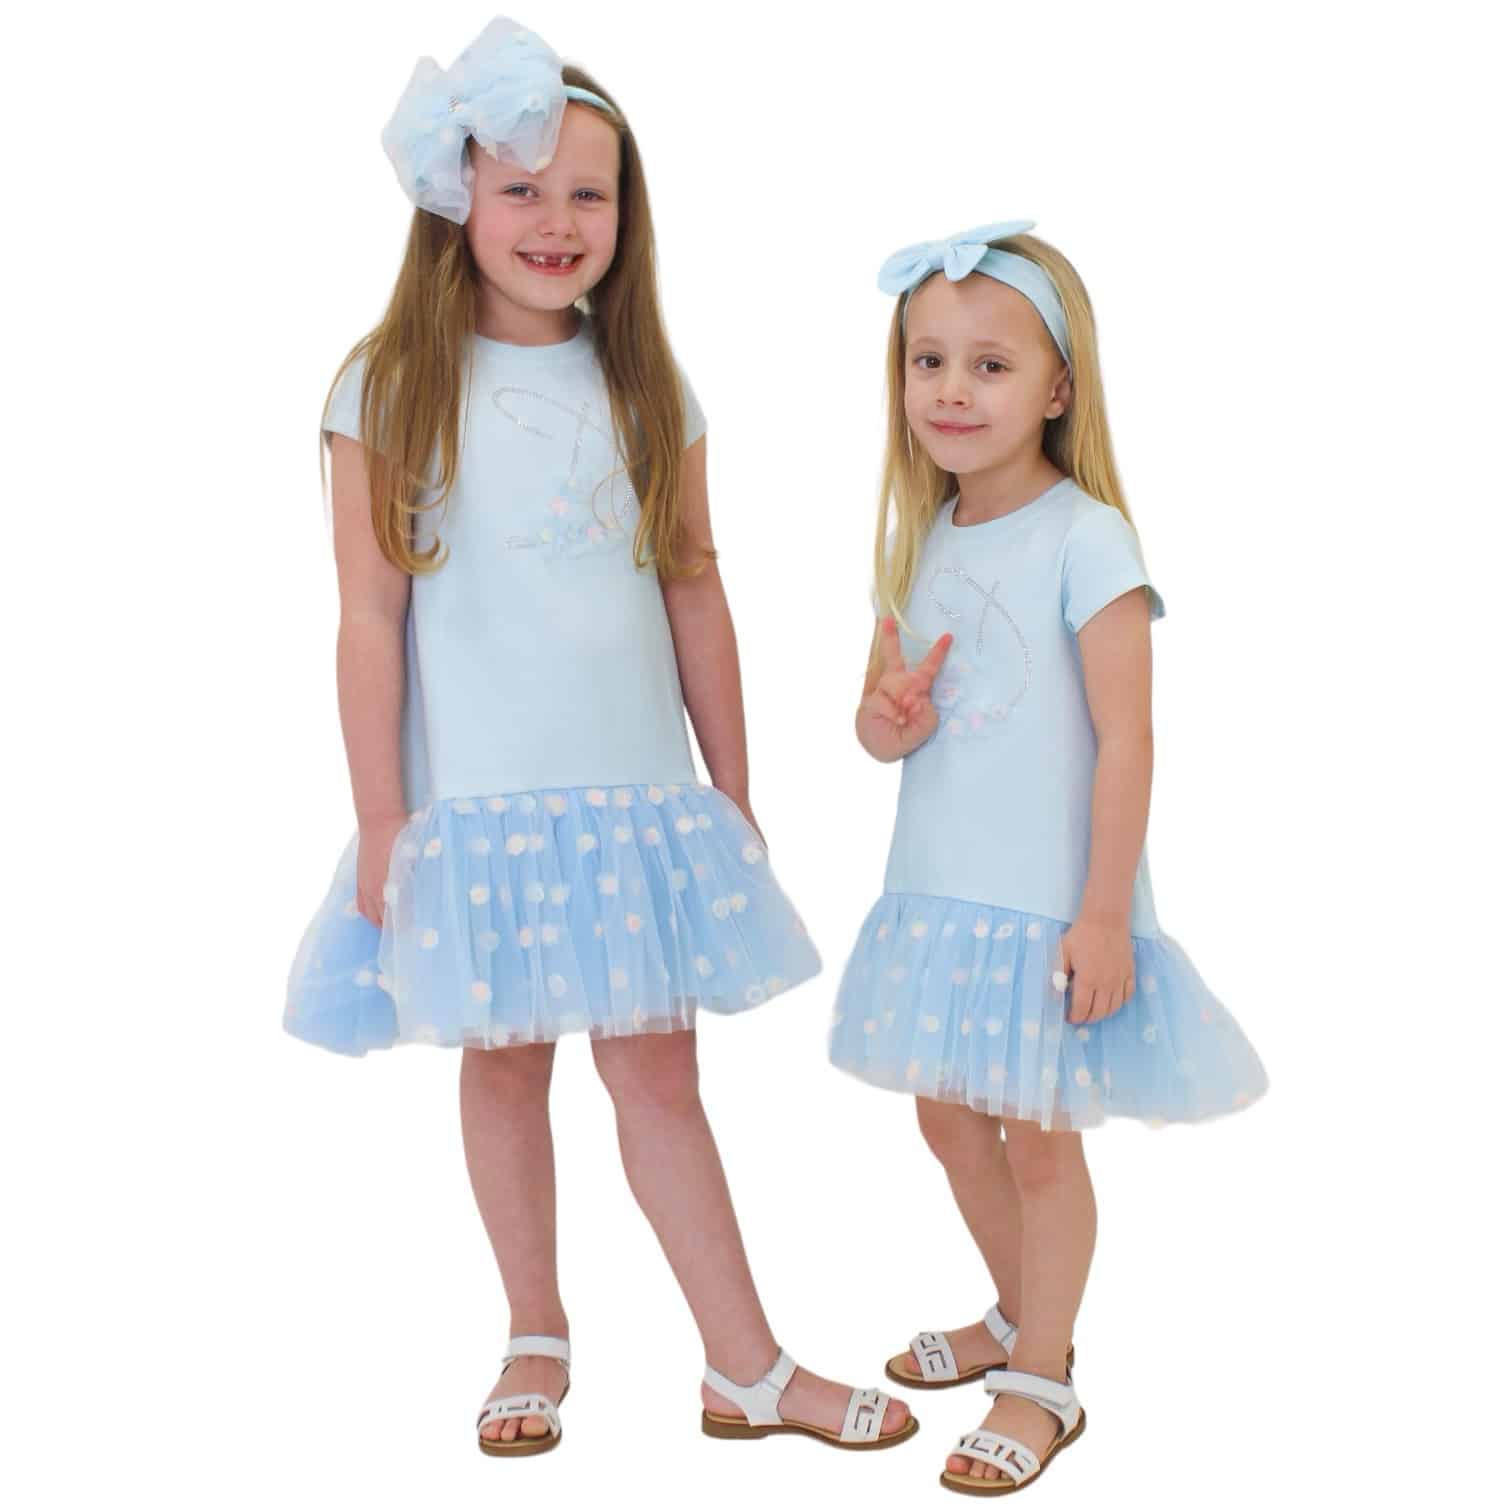 Designer children's clothing, little girls dresses, jackets and tops. Plus,  matching hand-made cotton dolls!